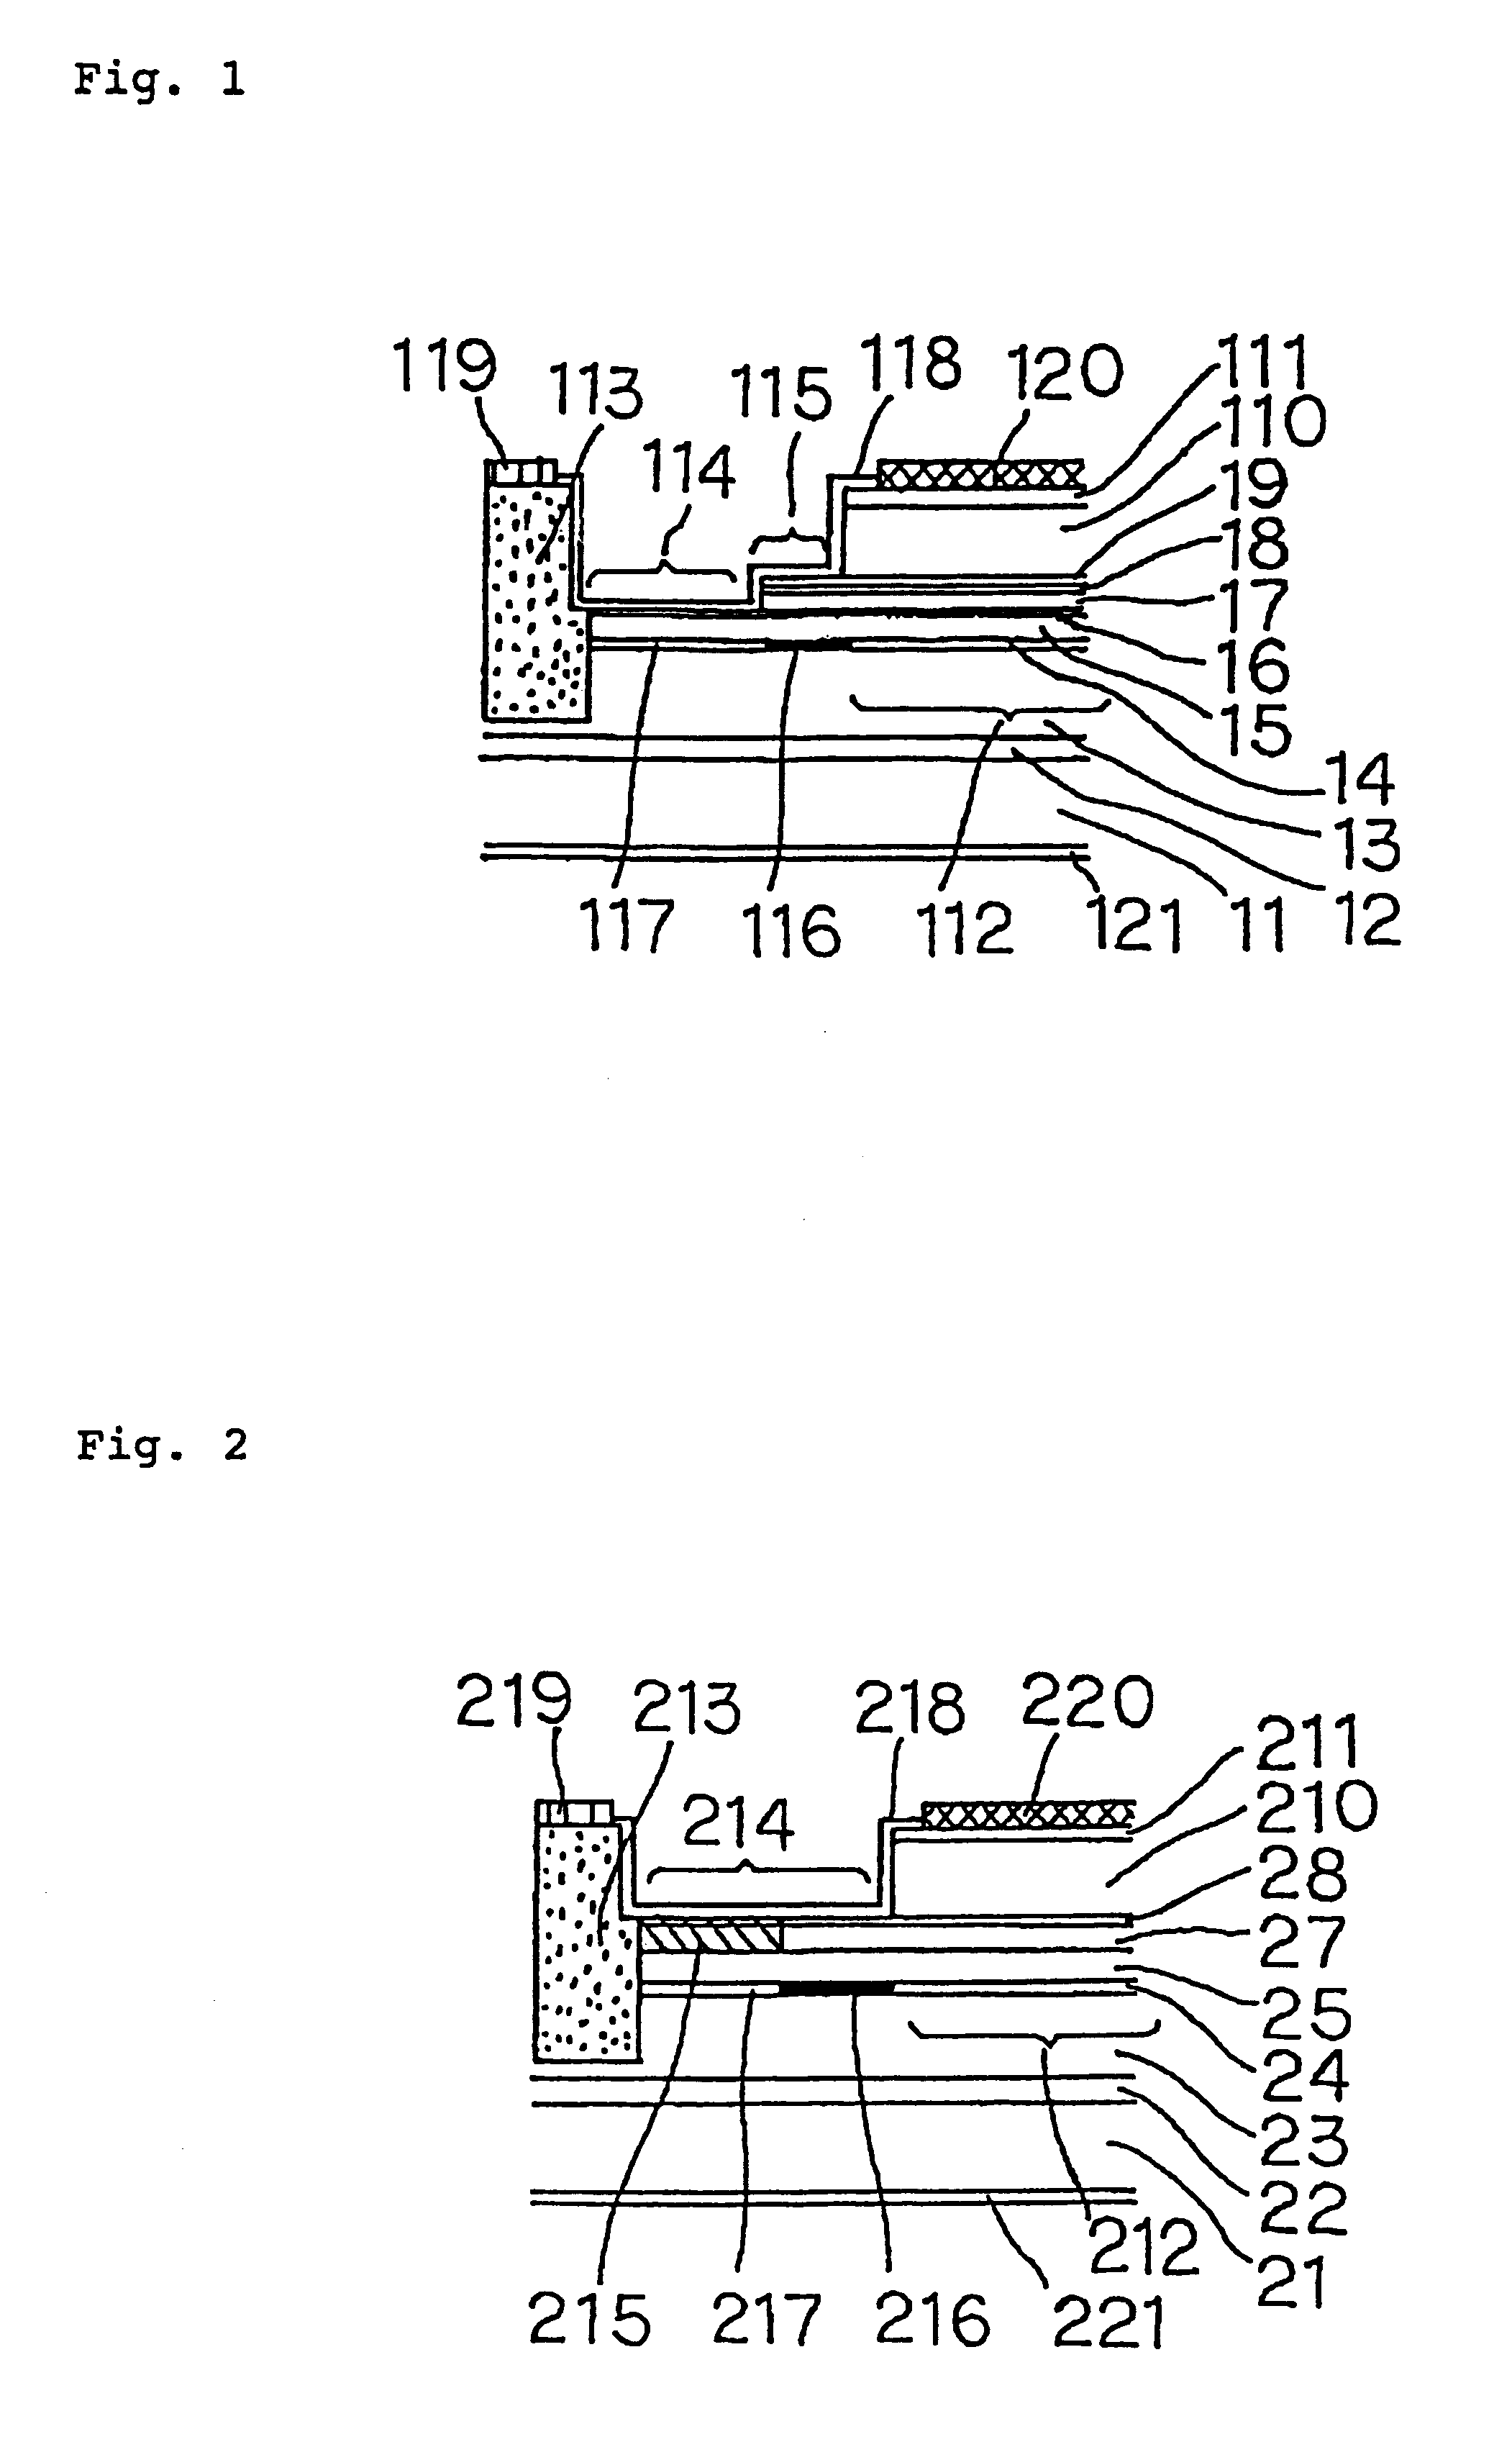 Planar-type avalanche photodiode